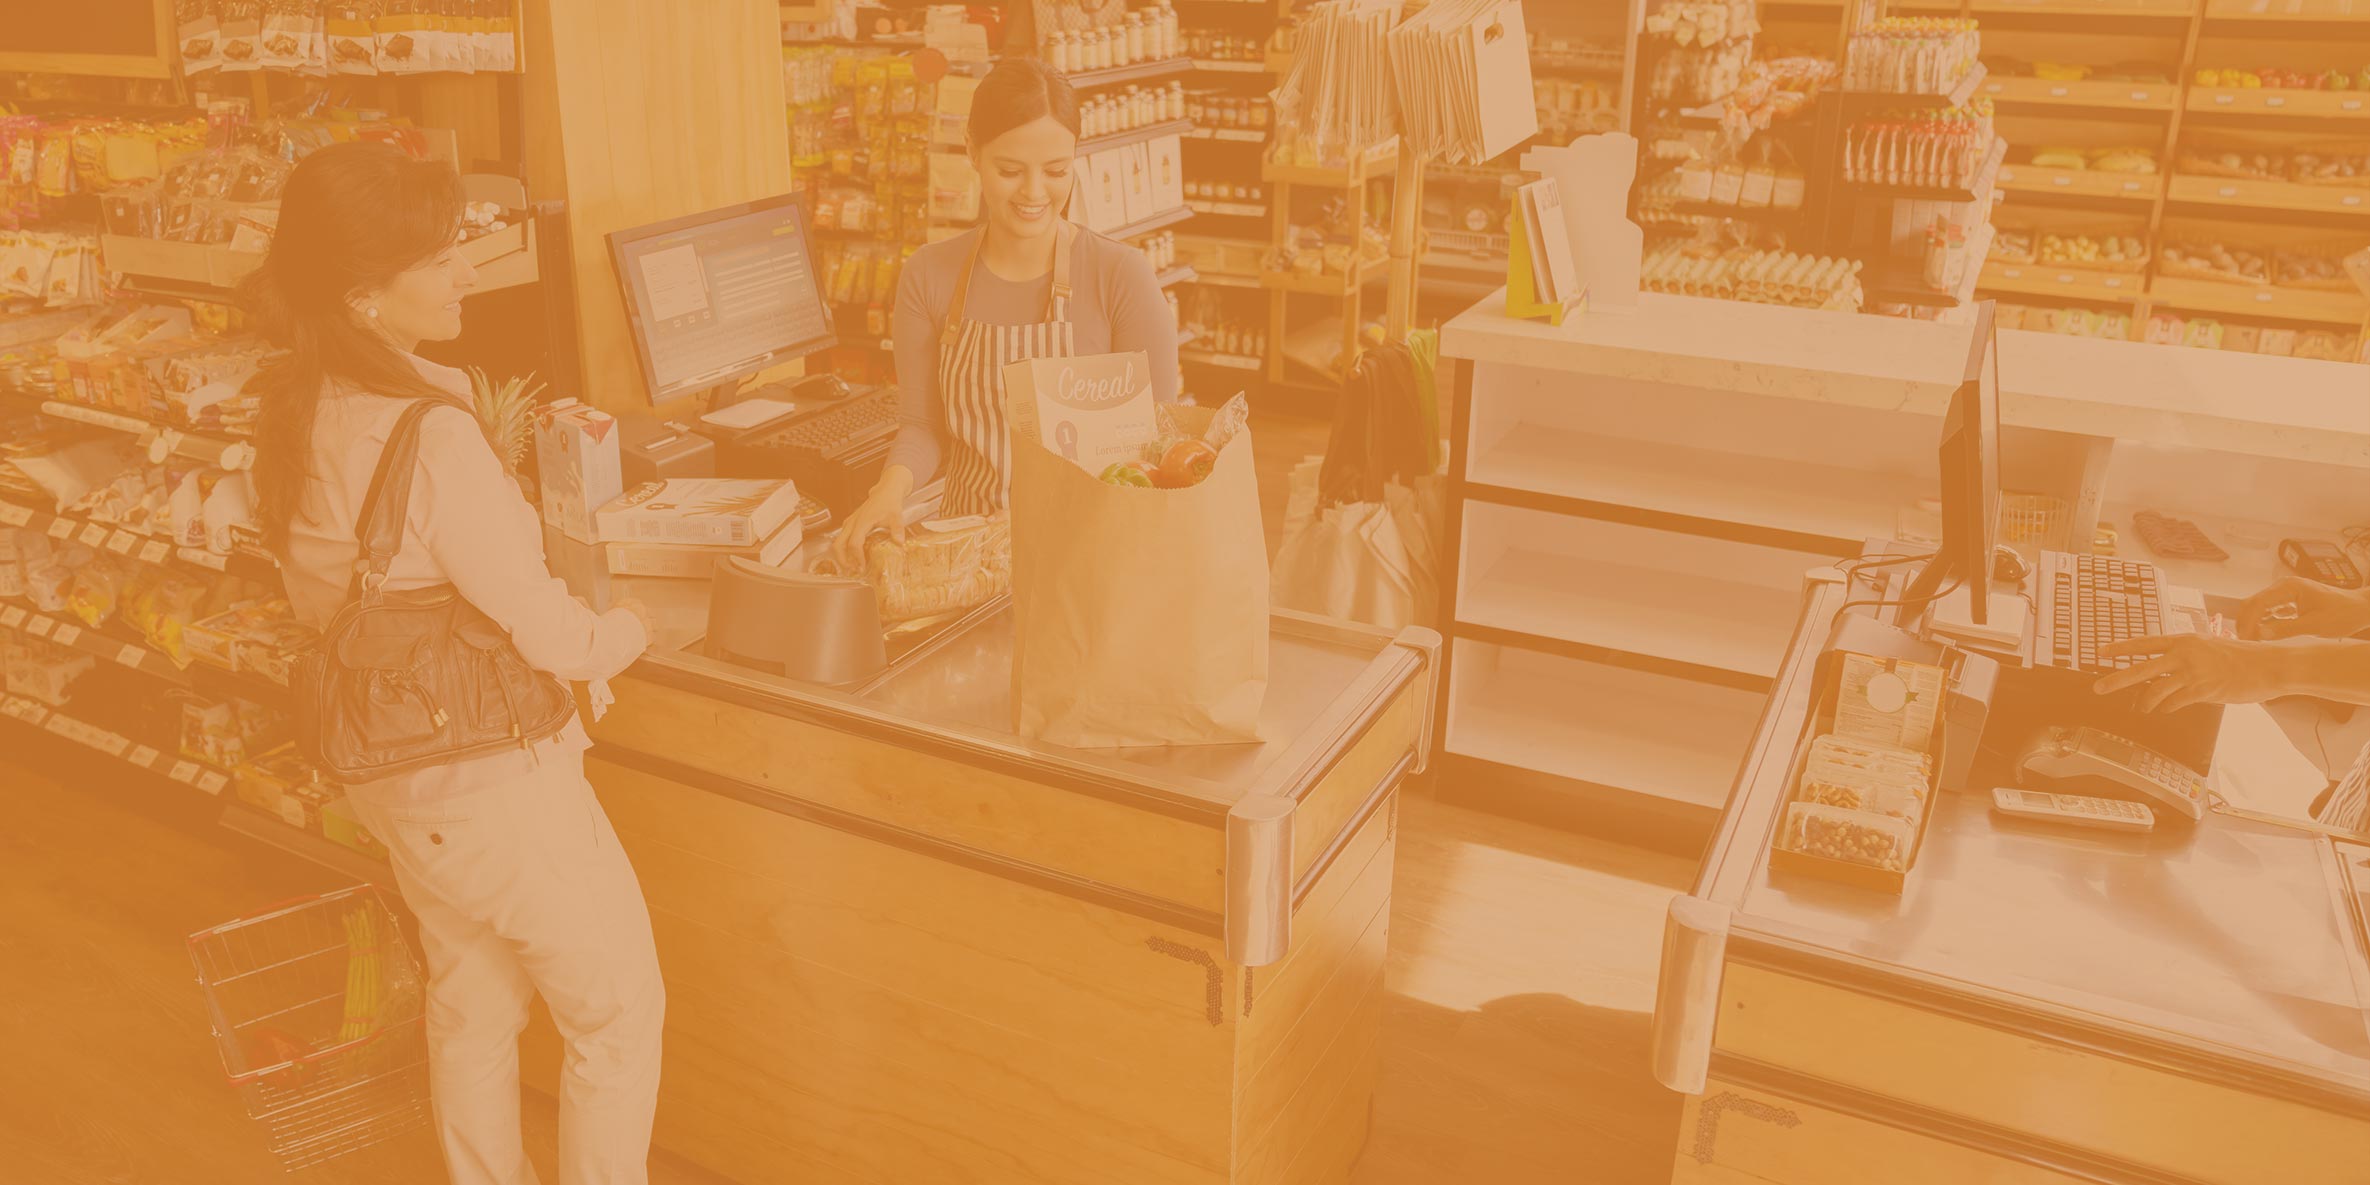 How to Monitor Activity at the Register With Video and Data Analytics 